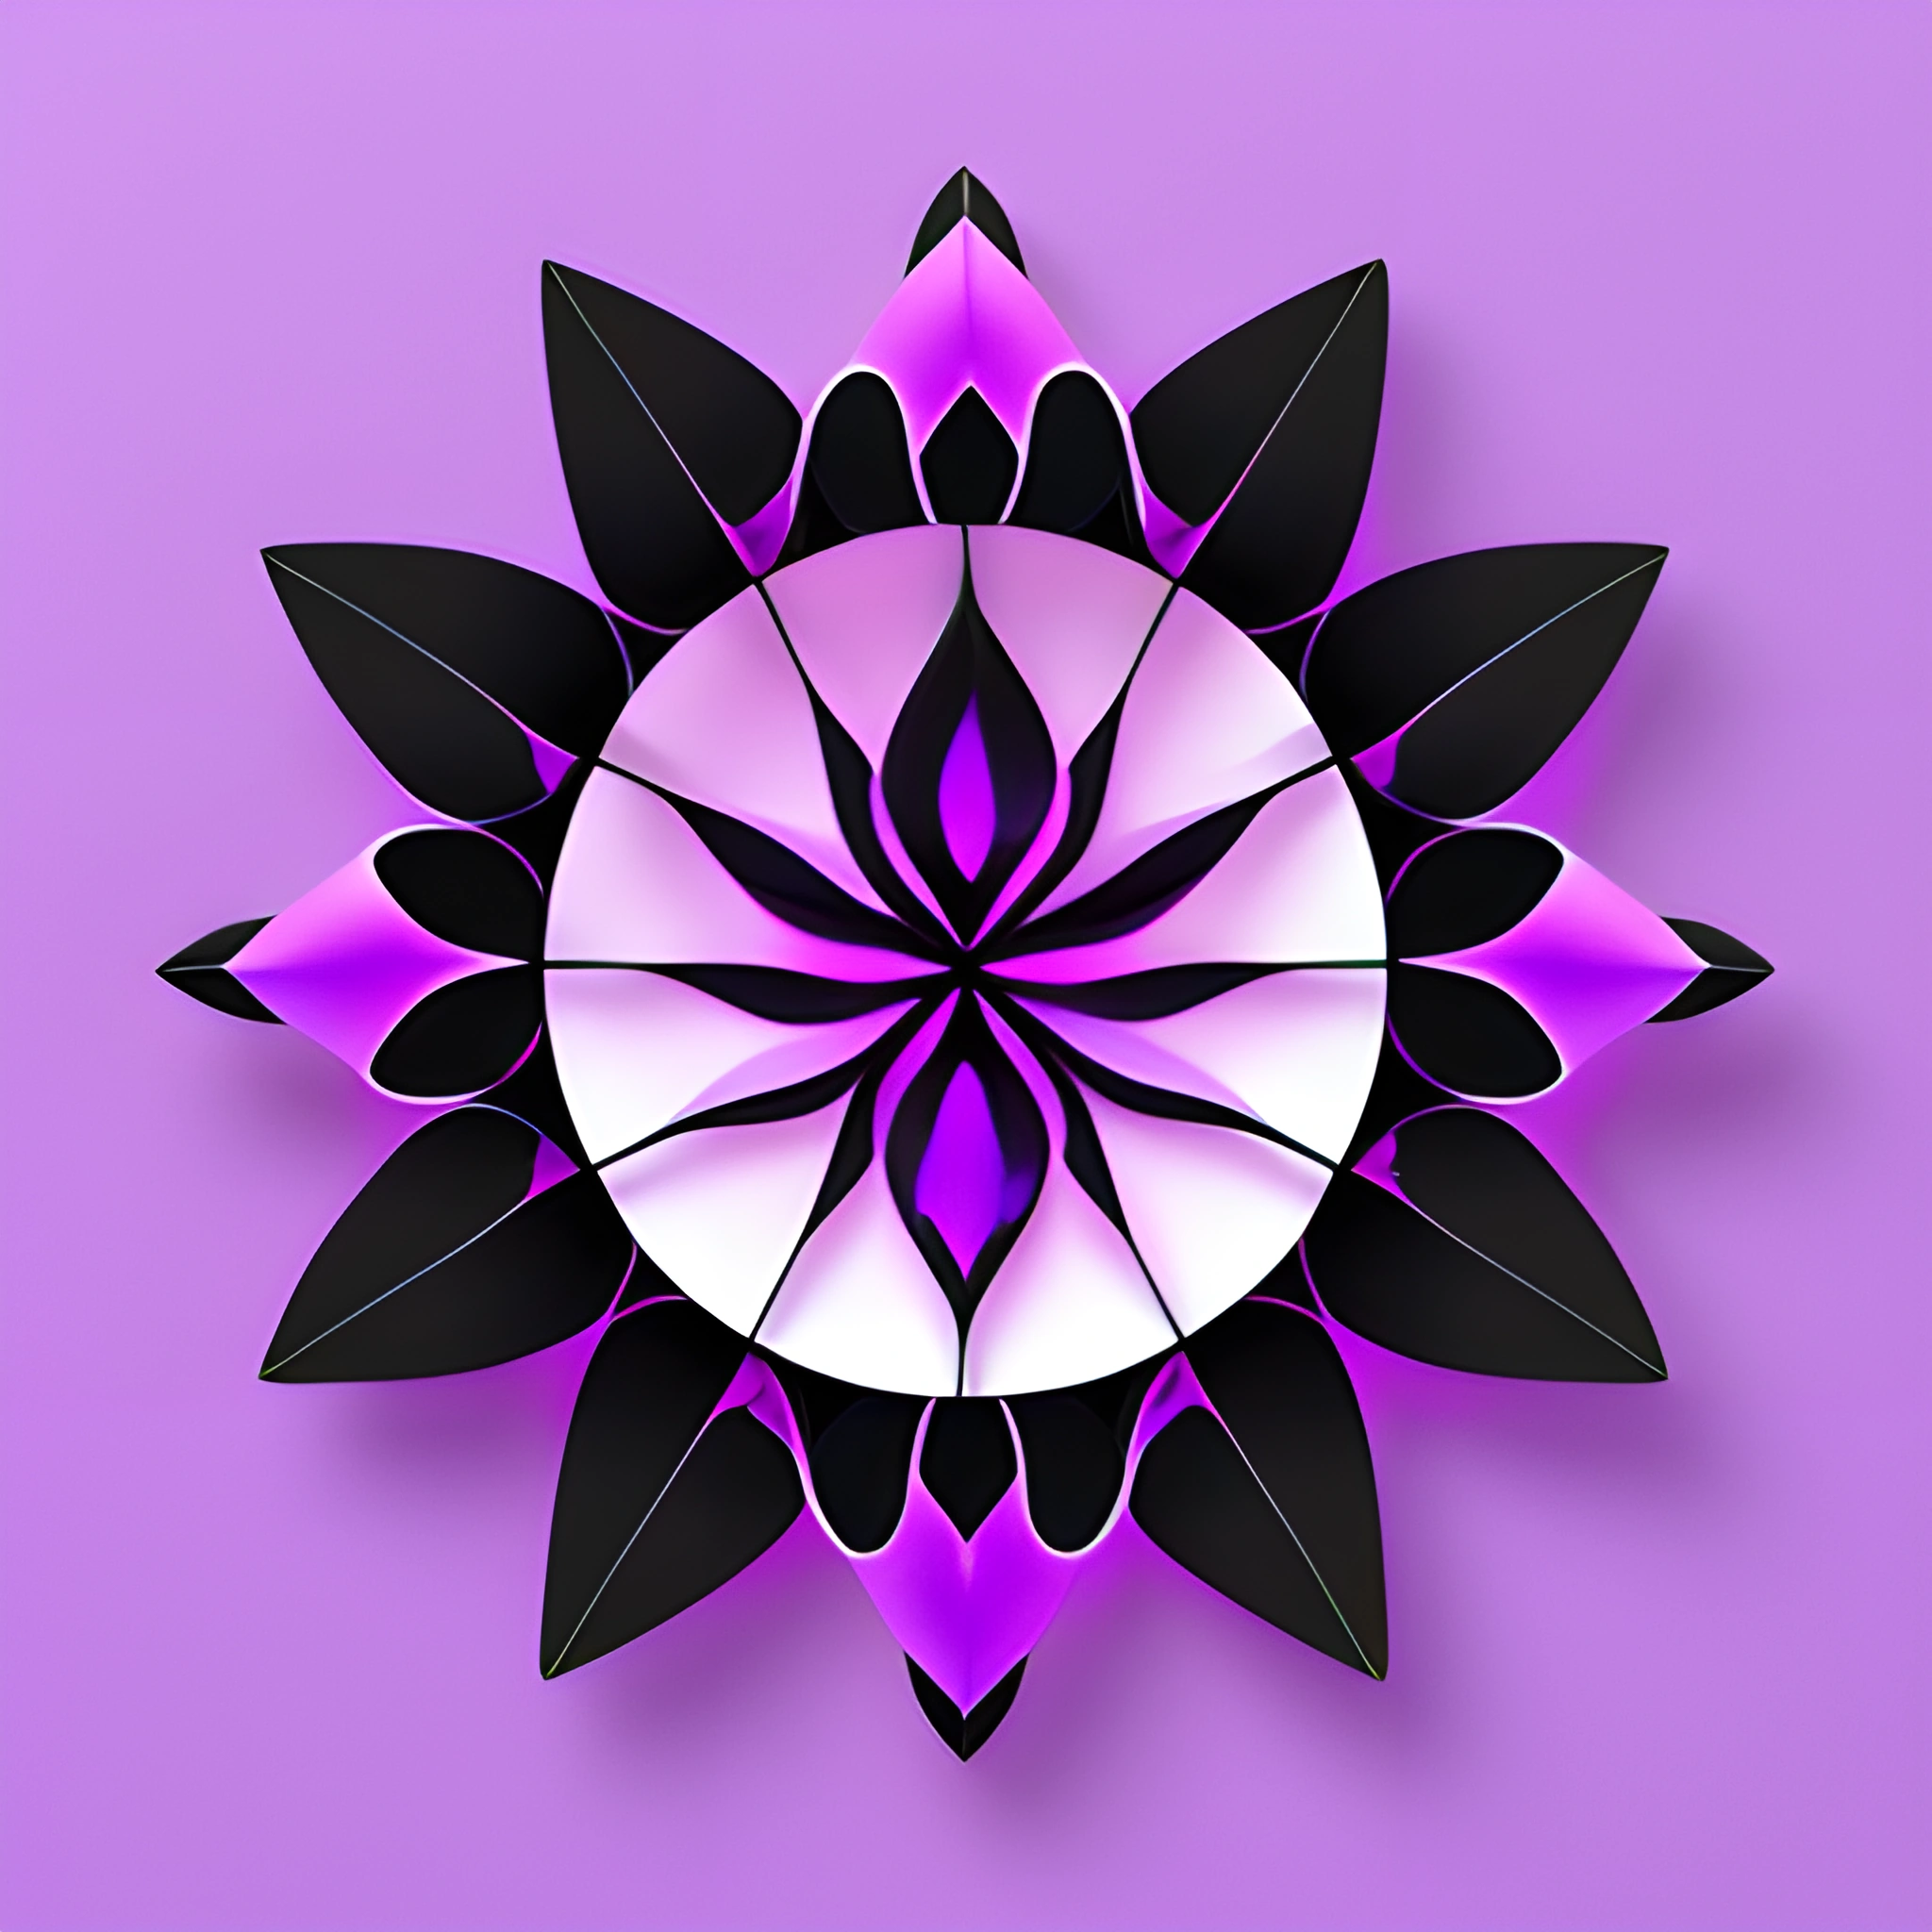 purple and black circular design with leaves on a purple background